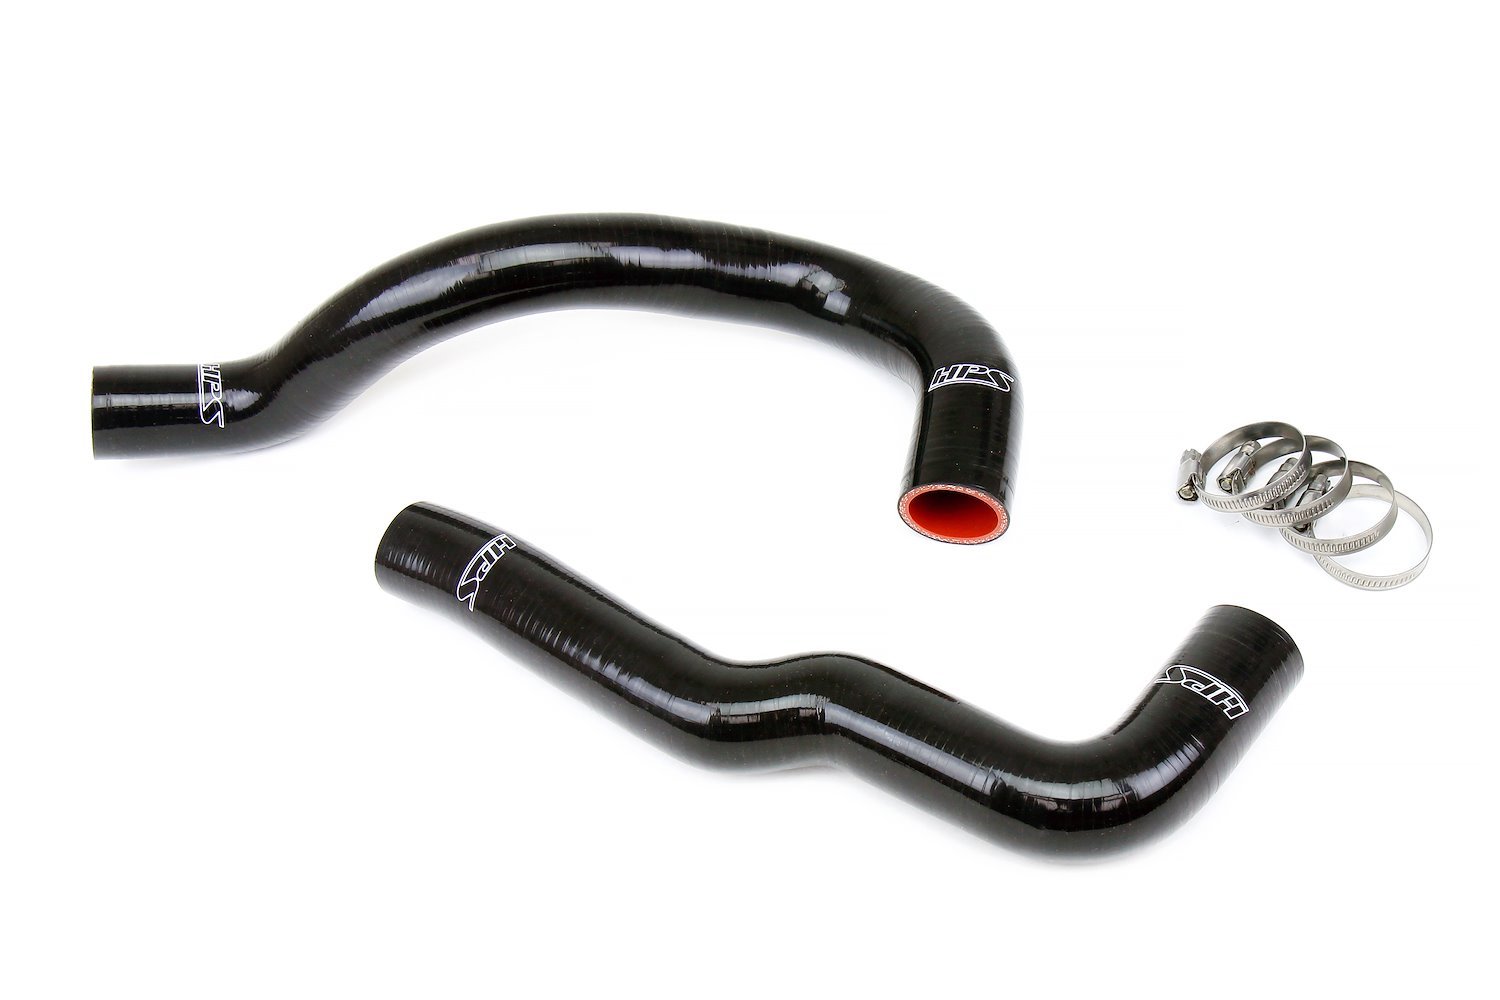 57-1936-BLK Radiator Hose Kit, 3-Ply Reinforced Silicone, Replaces Rubber Radiator Coolant Hoses